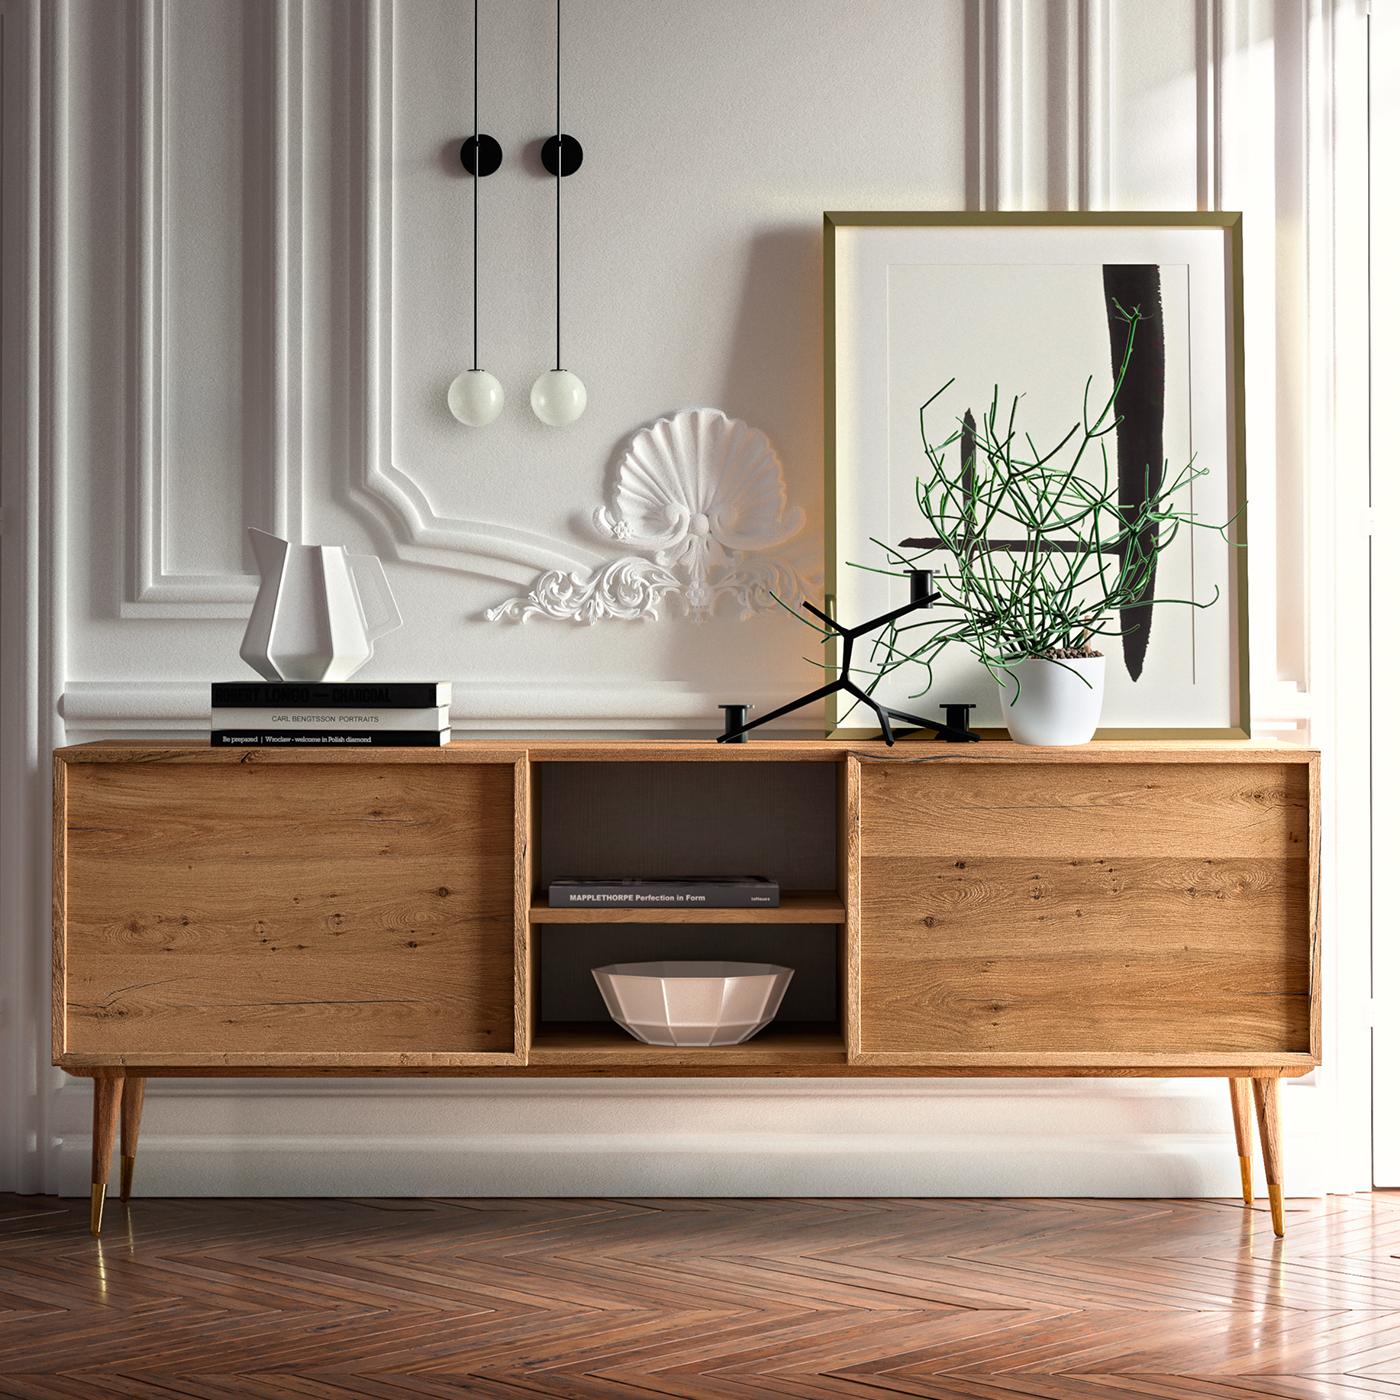 Linear and sophisticated, this sideboard is a versatile object of functional decor that boasts a mid-century modern flair with its slanted, tapered legs in solid durmast and tips in gold-finished brass. The wooden structure with an antique durmast